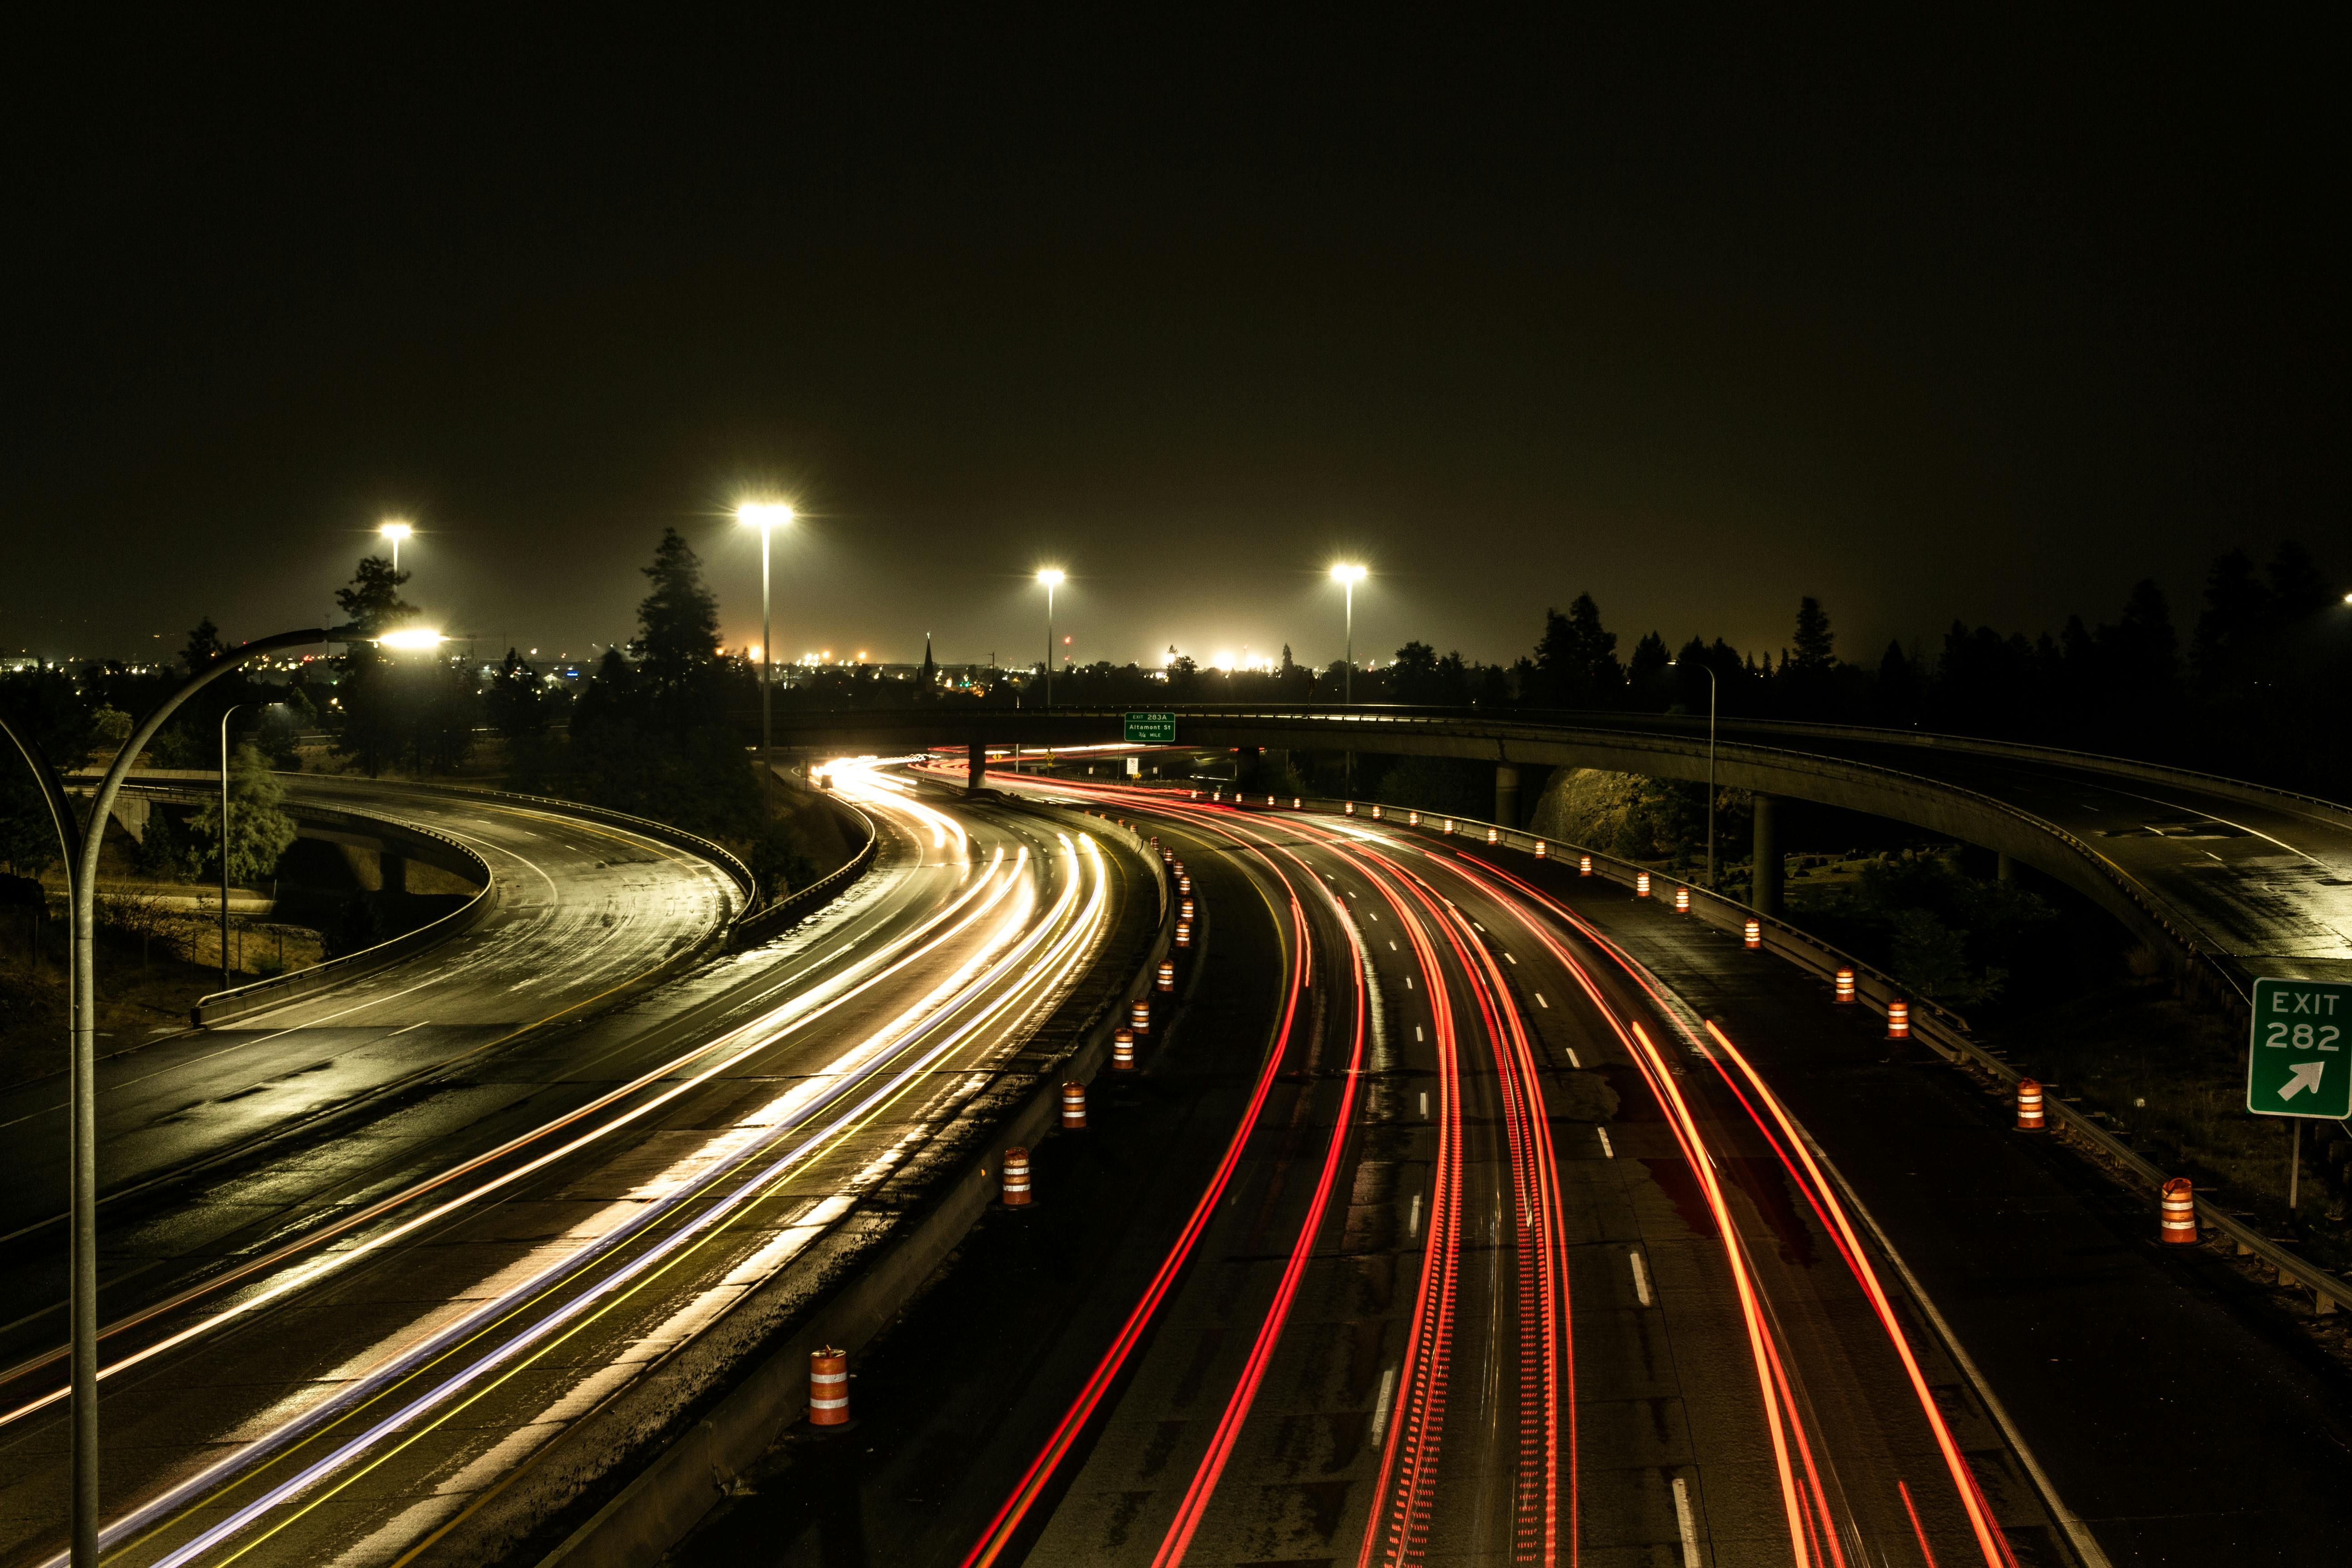 a time lapse photography of moving cars on the road at night